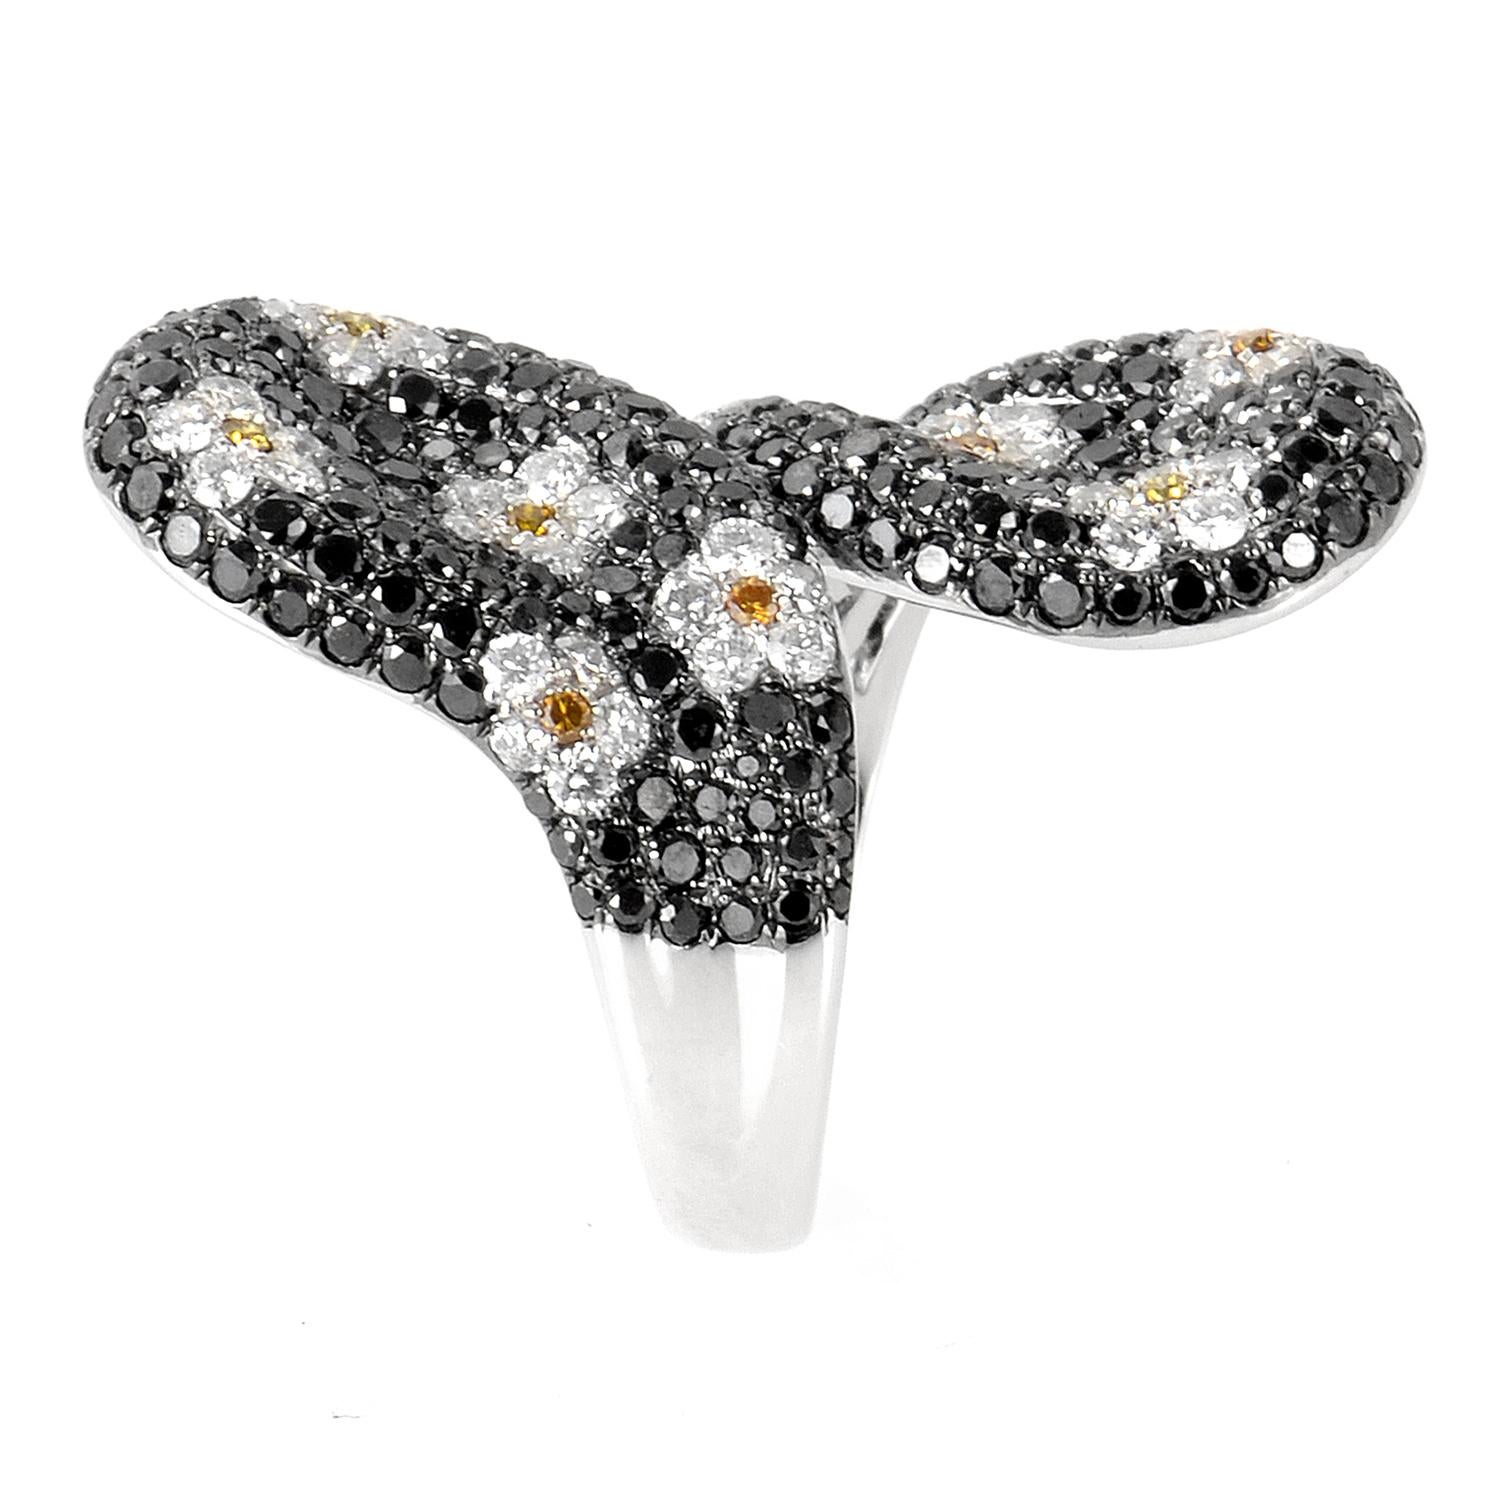 This ring is opulent and shines with diamonds. This fabulous ring is made of 18K white gold and is set with ~4.18ct of black, white and yellow diamonds that form a lovely daisy motif on the ring. 